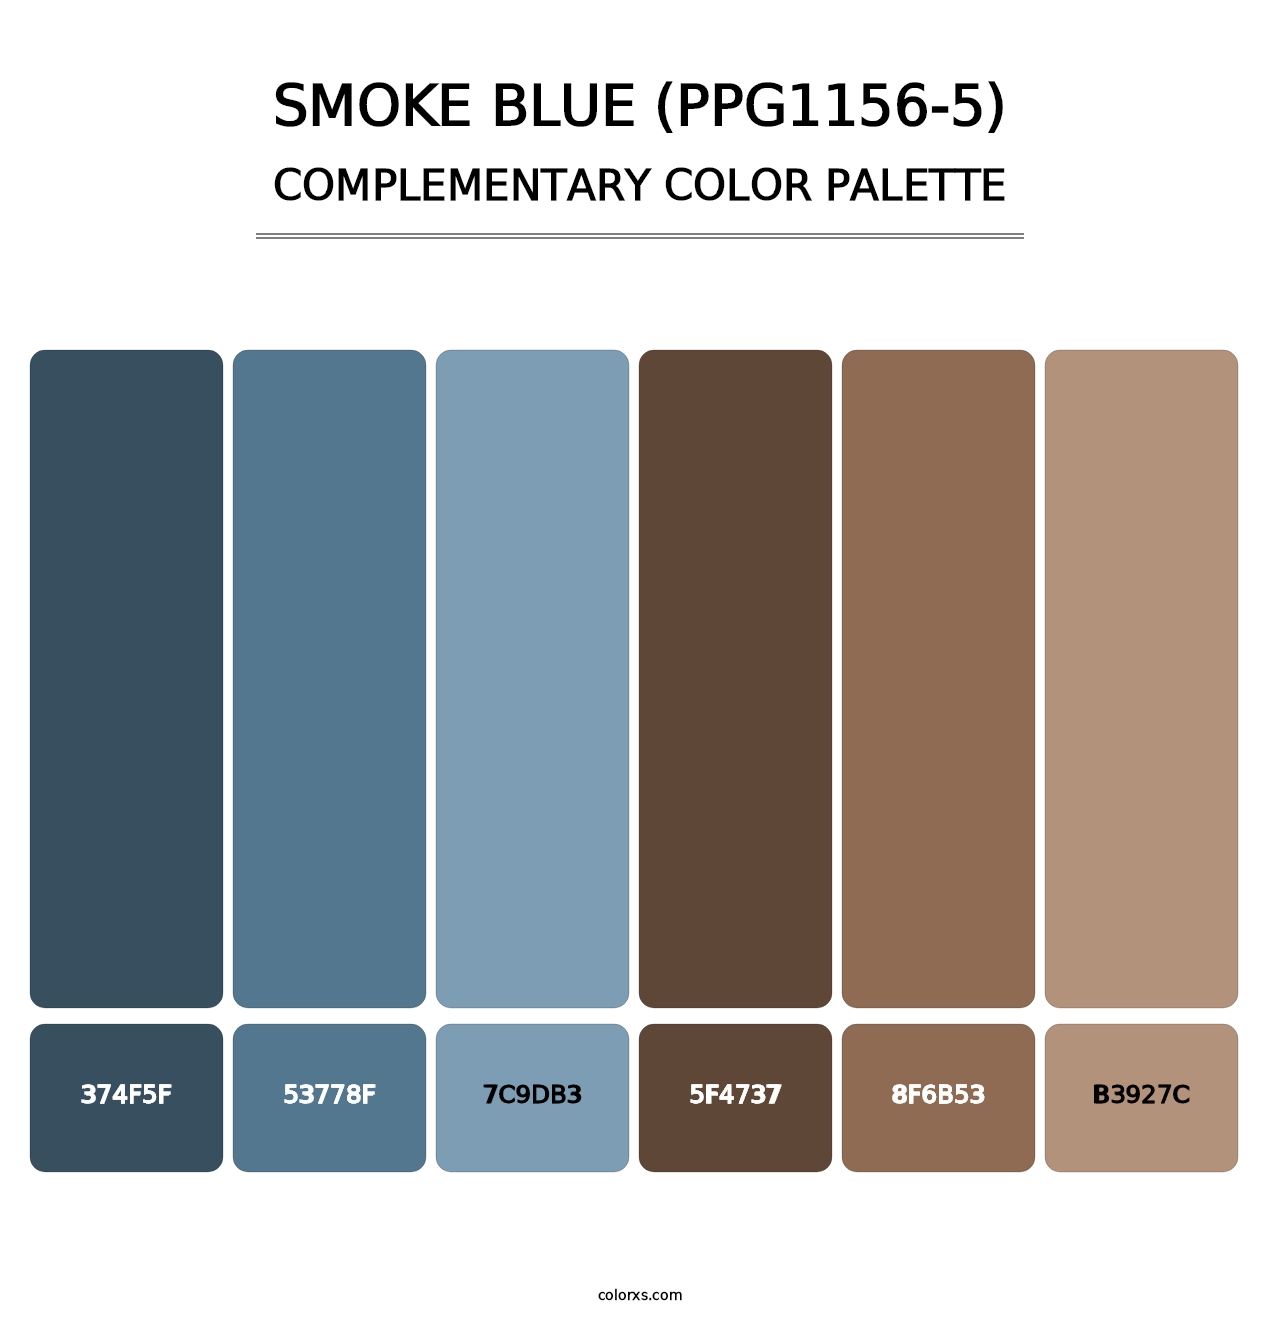 Smoke Blue (PPG1156-5) - Complementary Color Palette